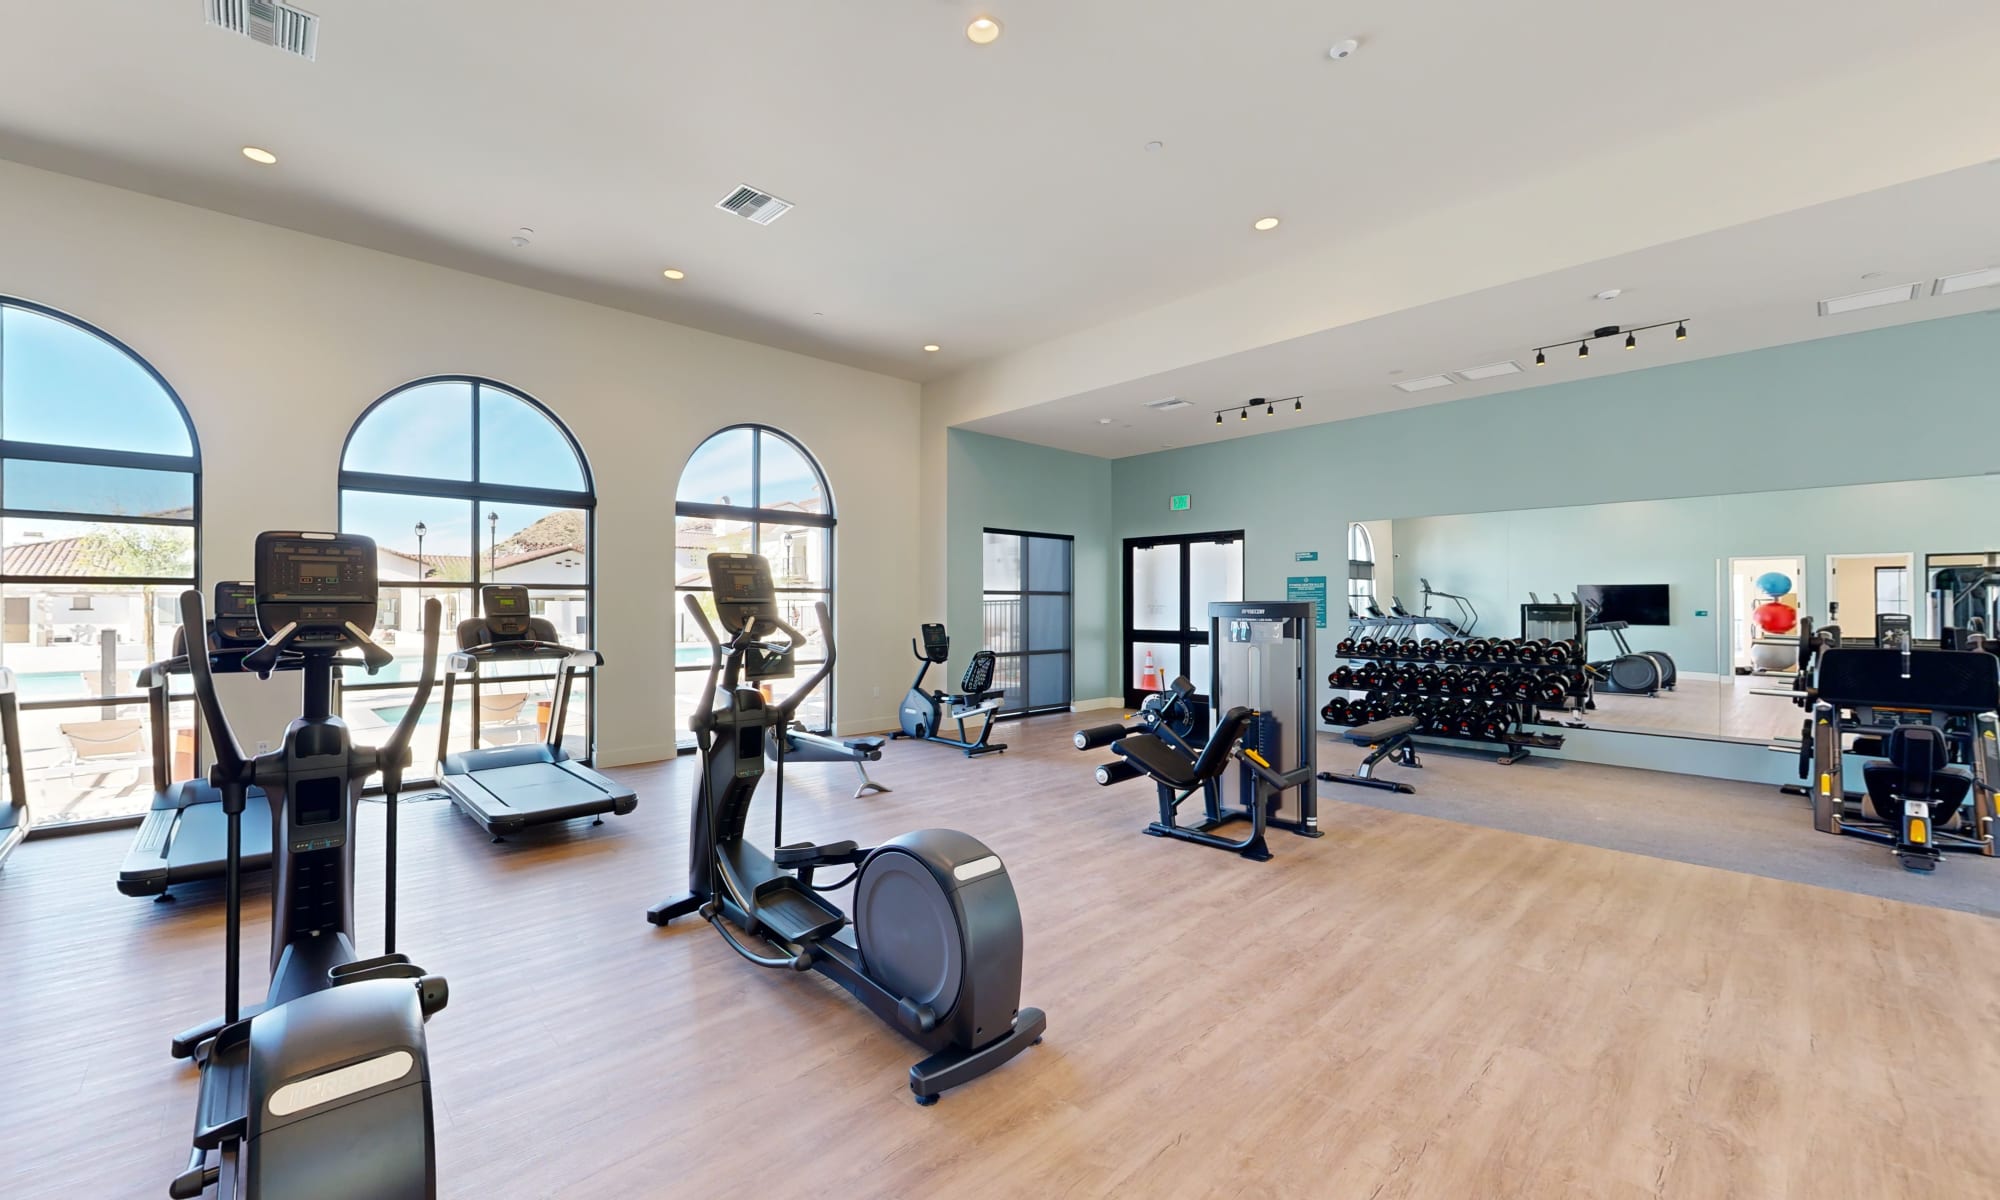 Fitness center with cardio workout equipment at The Villas at Anacapa Canyon in Camarillo, California